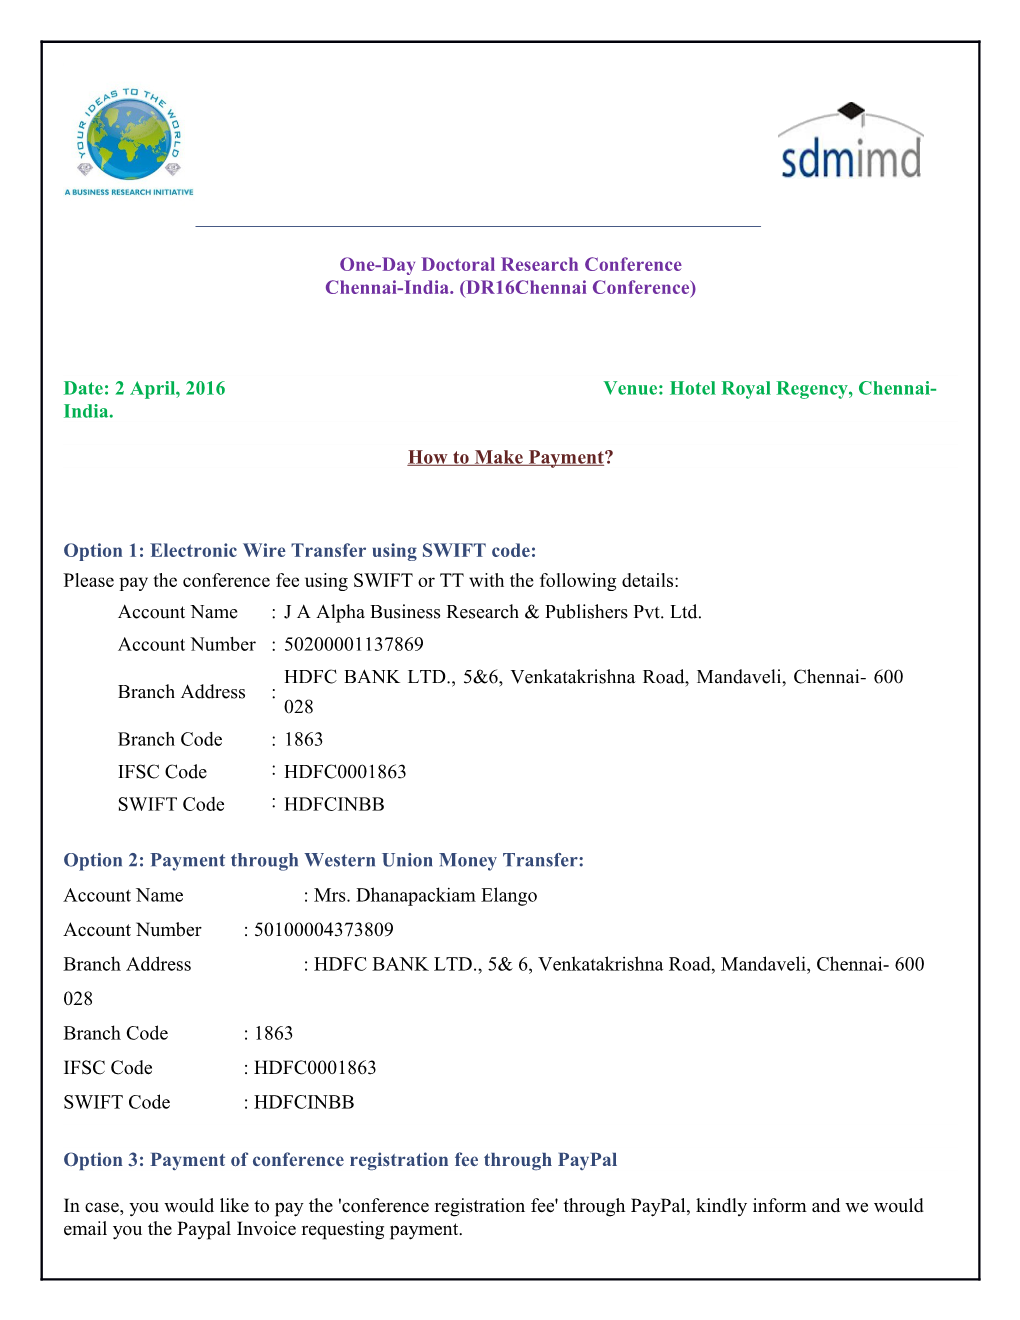 One-Day Doctoral Research Conference